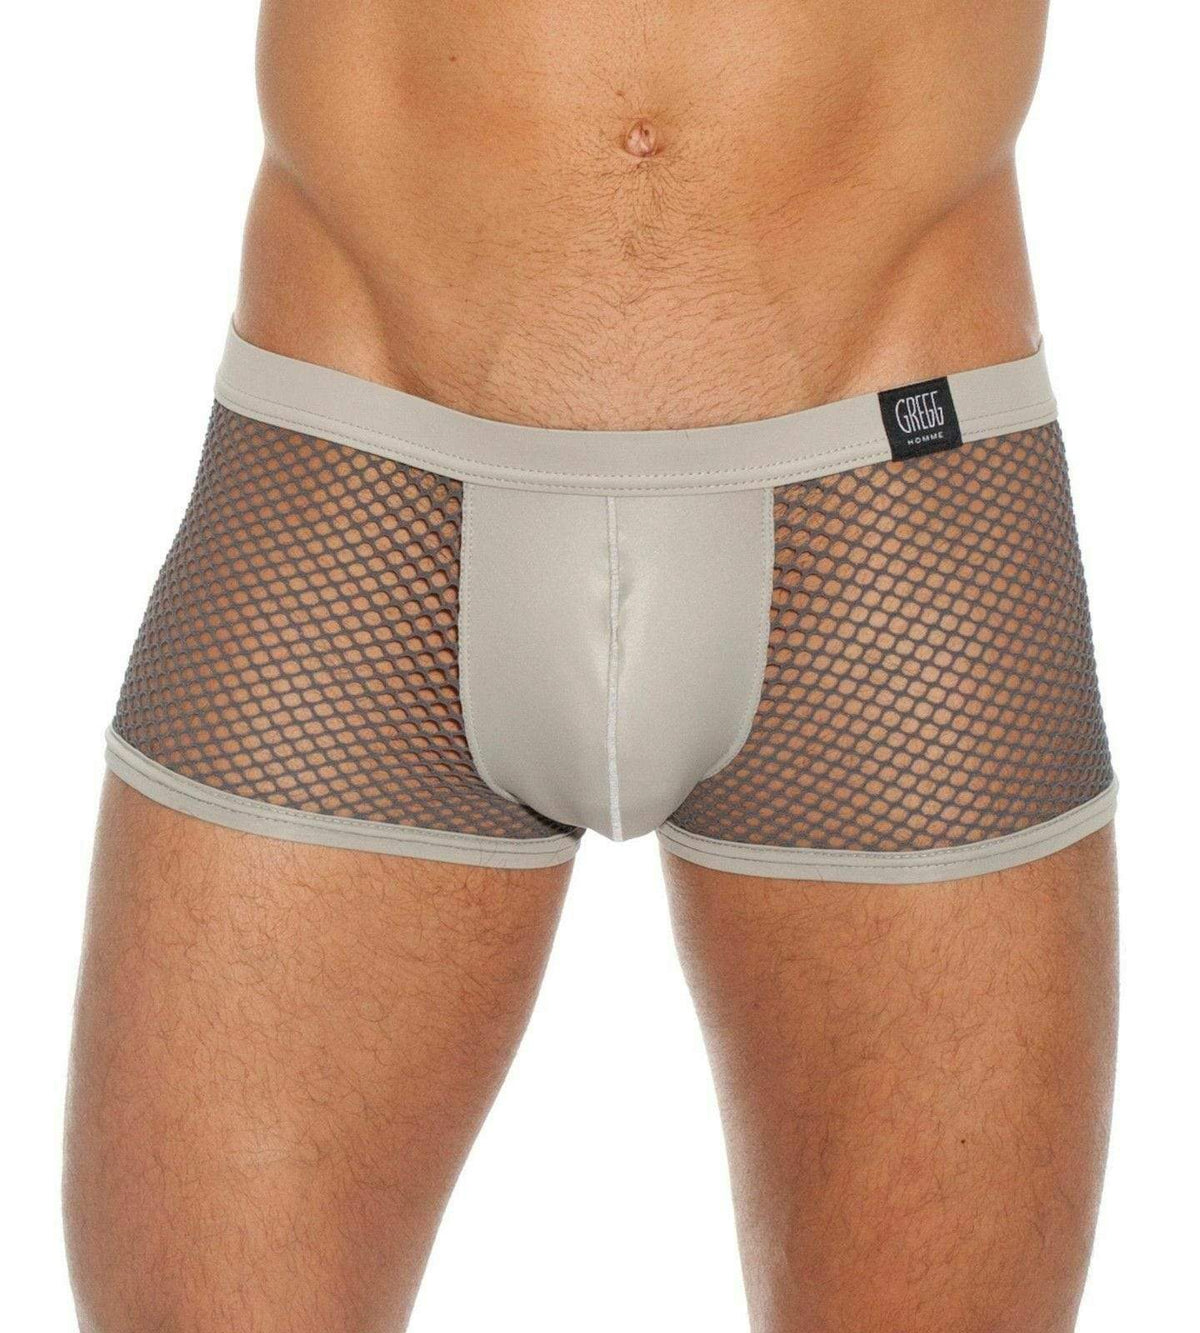 LARGE Gregg Homme Brief Beyond Doubt Mesh Sexy Slip Royal Large